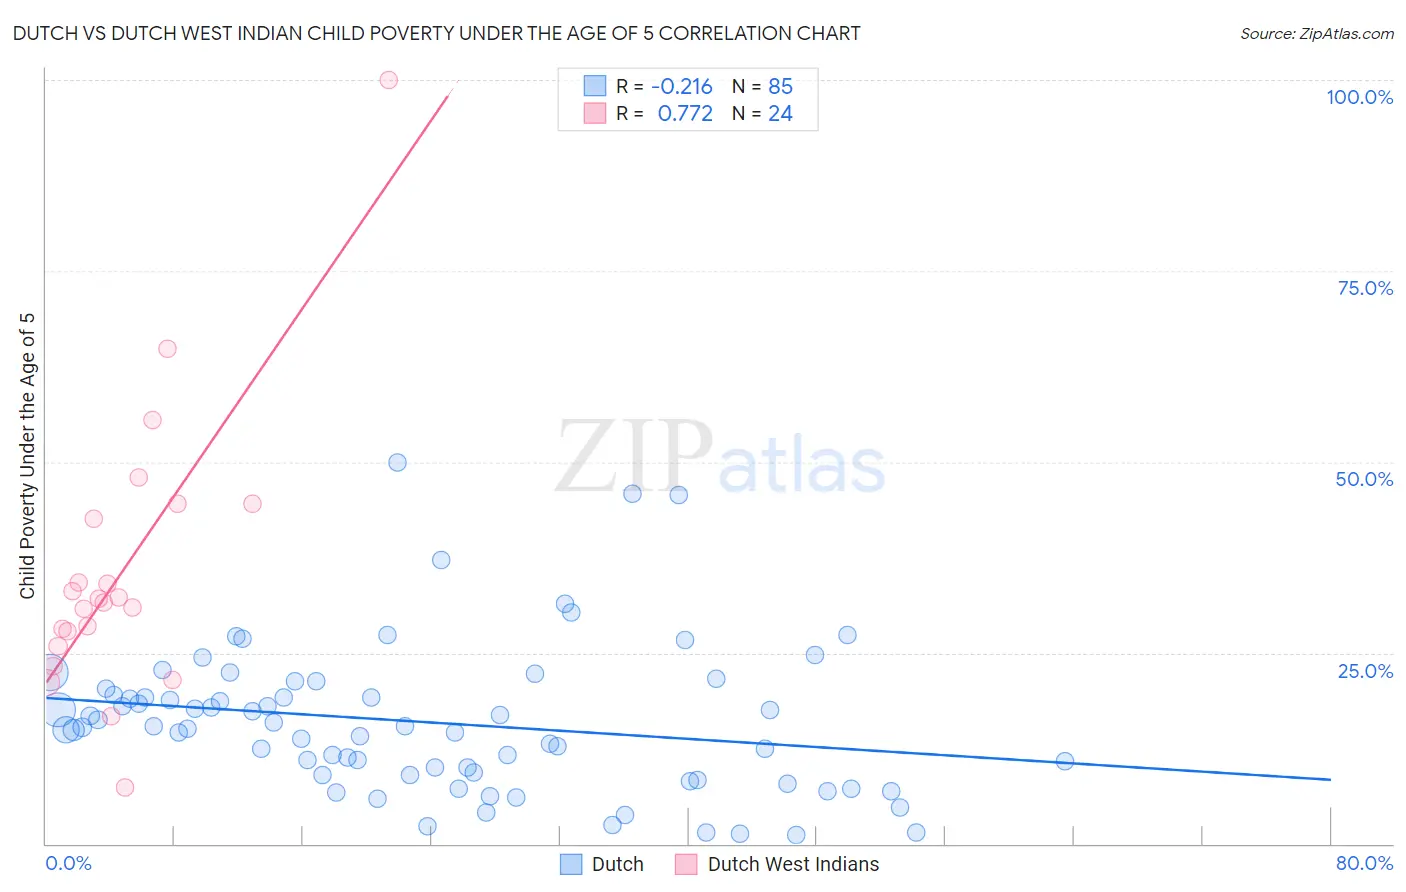 Dutch vs Dutch West Indian Child Poverty Under the Age of 5